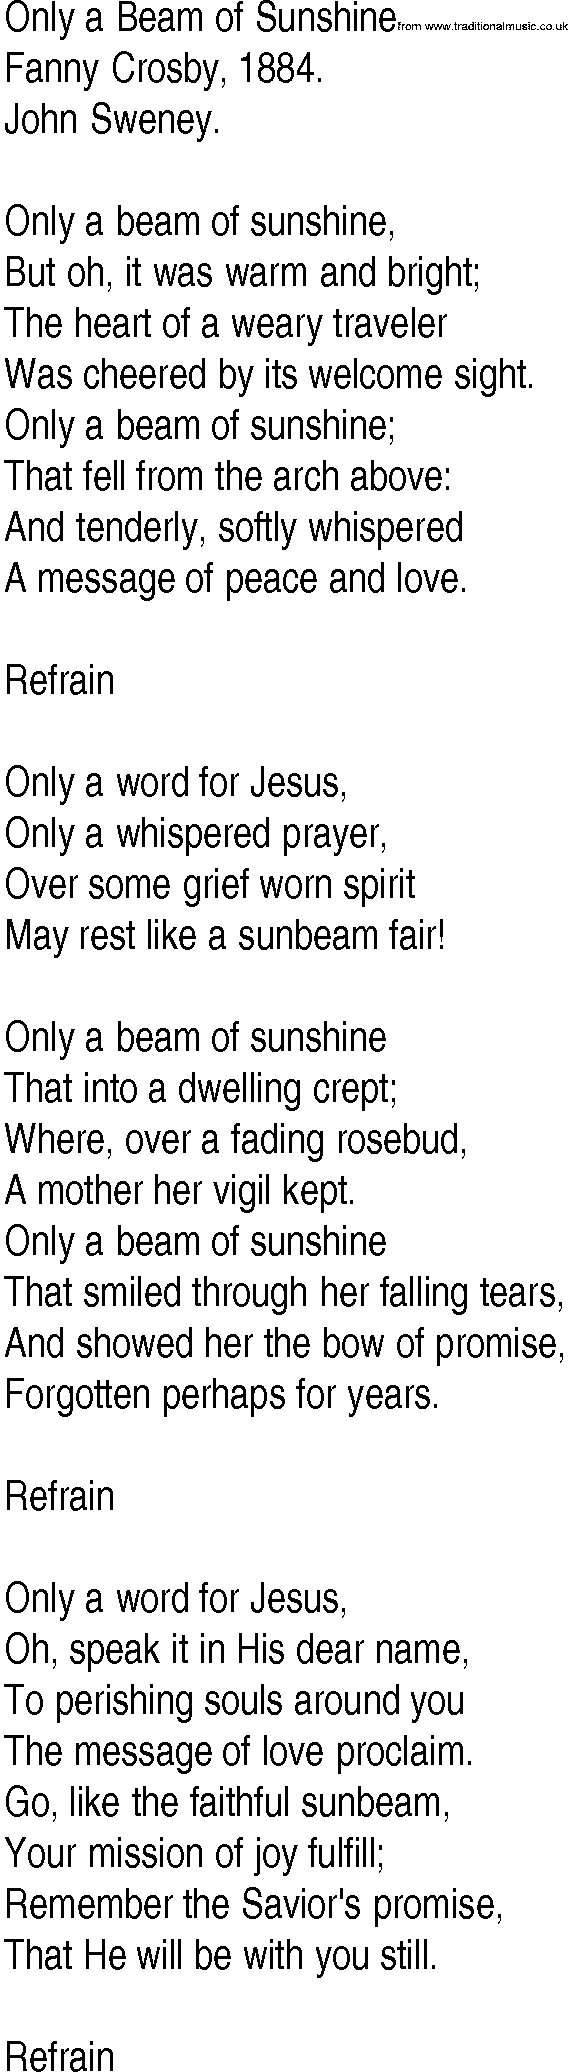 Hymn and Gospel Song: Only a Beam of Sunshine by Fanny Crosby lyrics